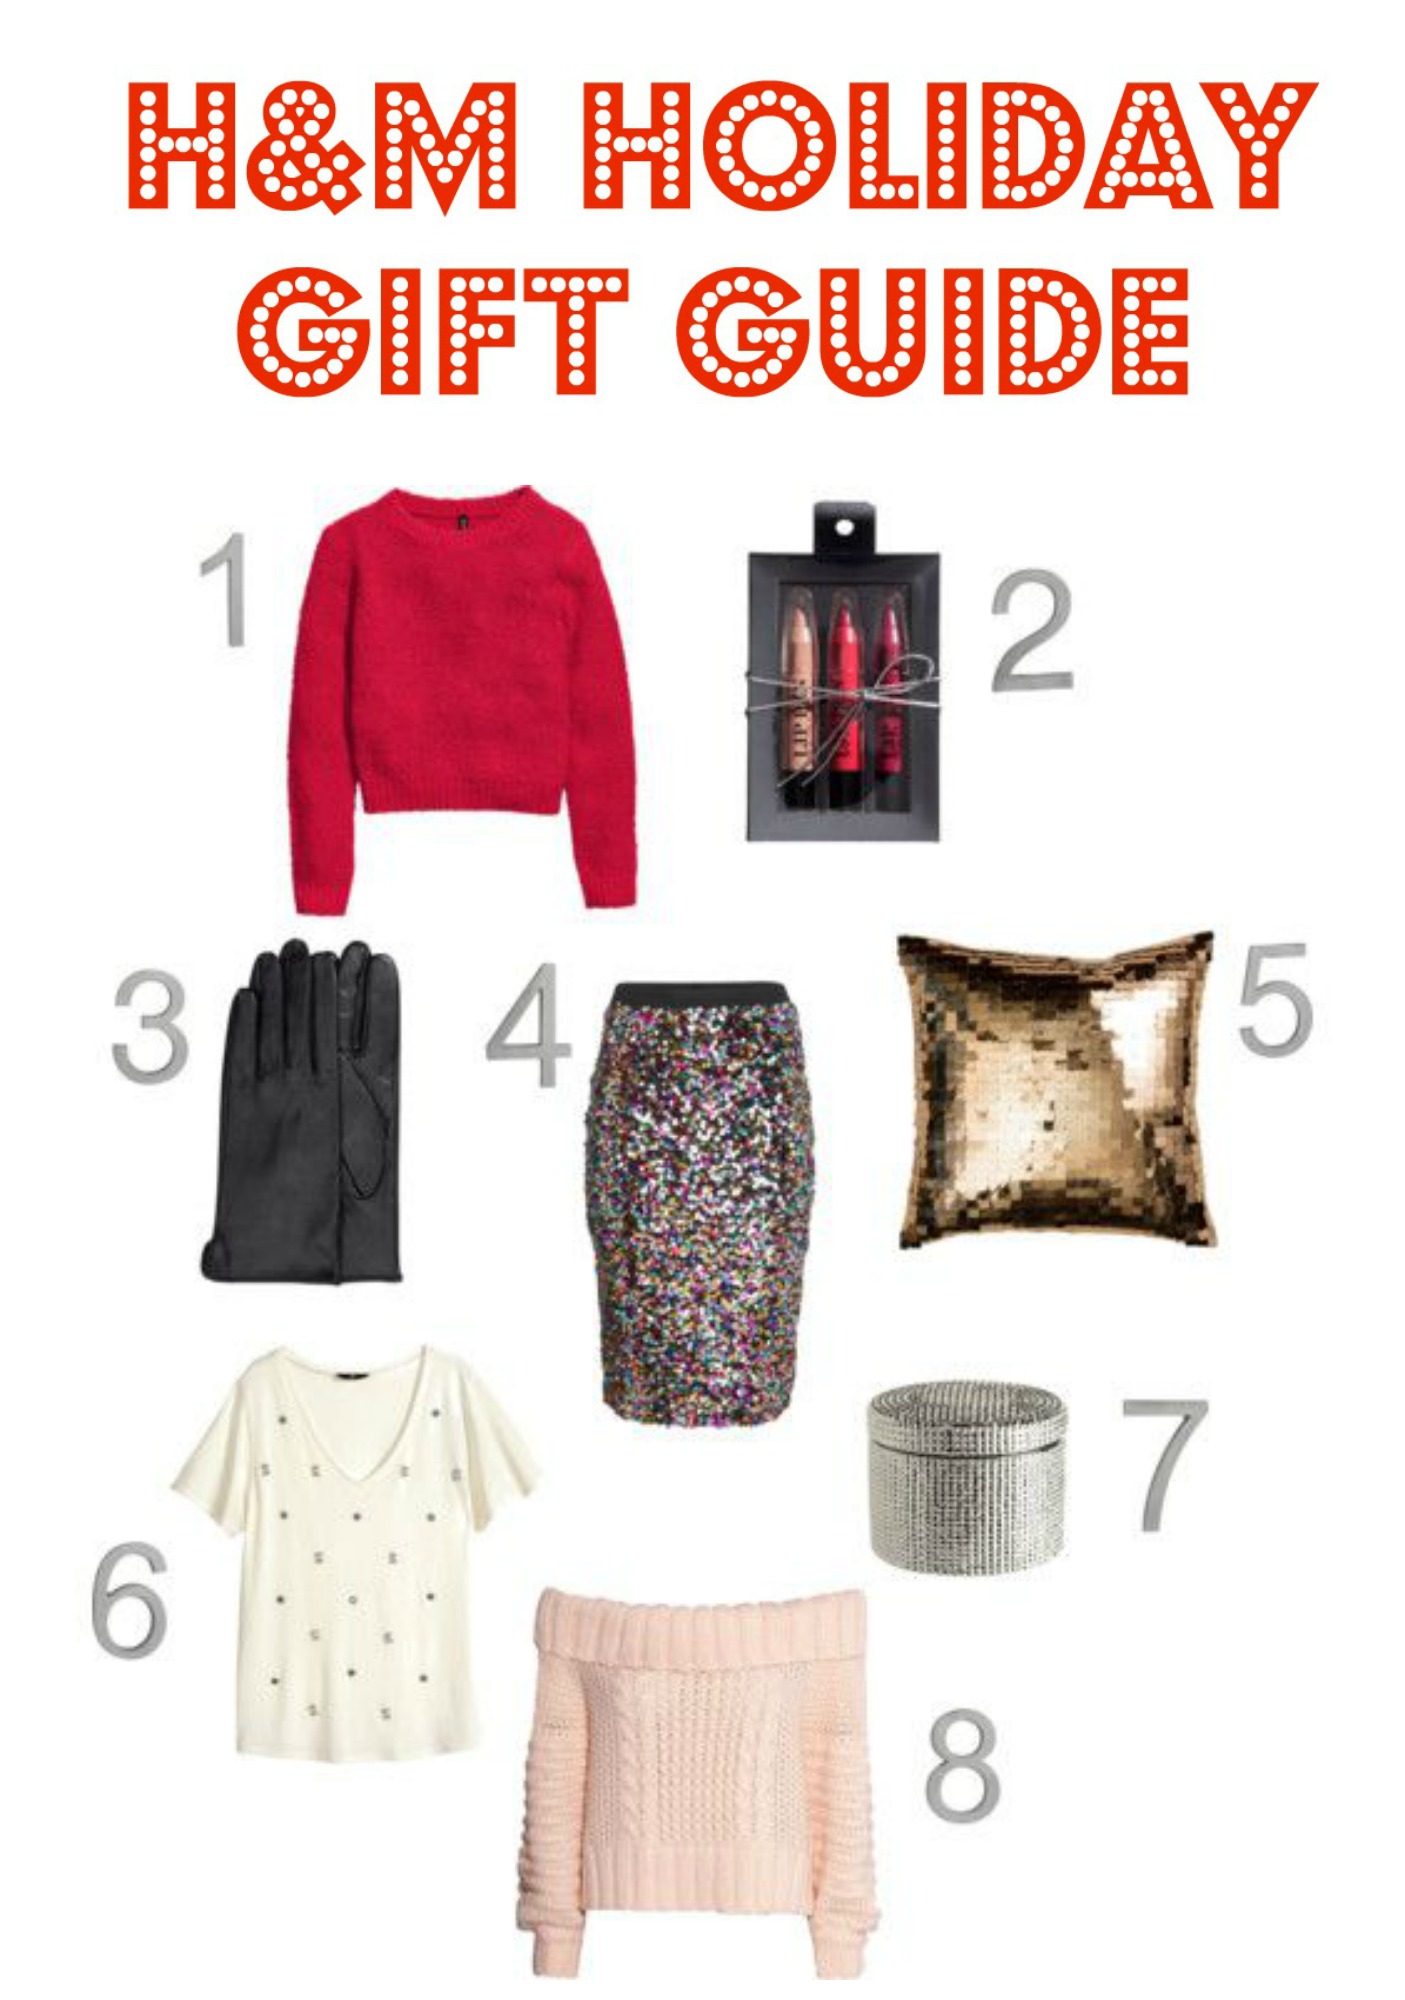 H&M Holiday Gift Guide 2014